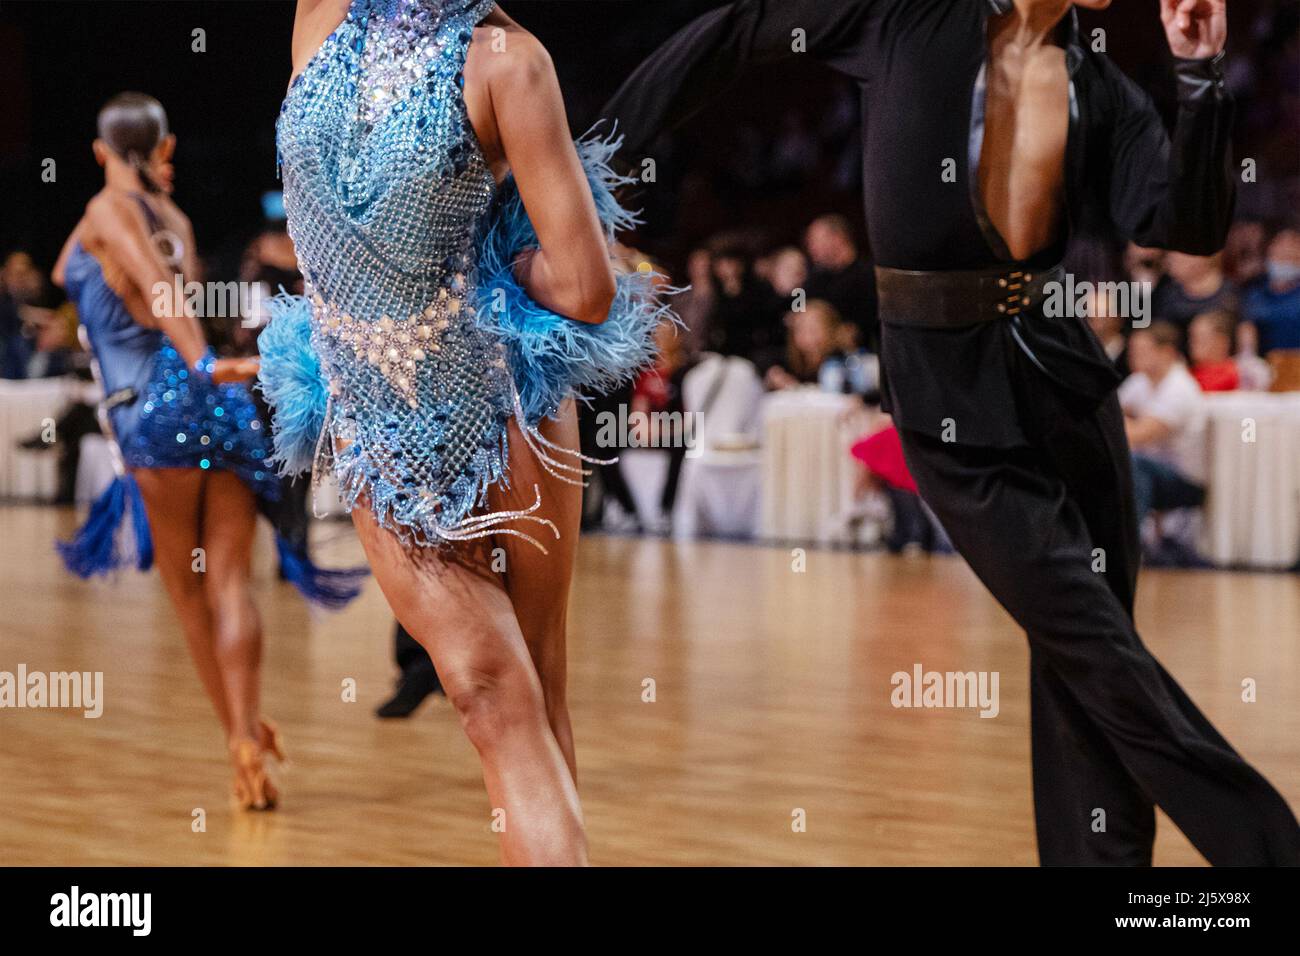 couple dancers dancing in dance competition Stock Photo